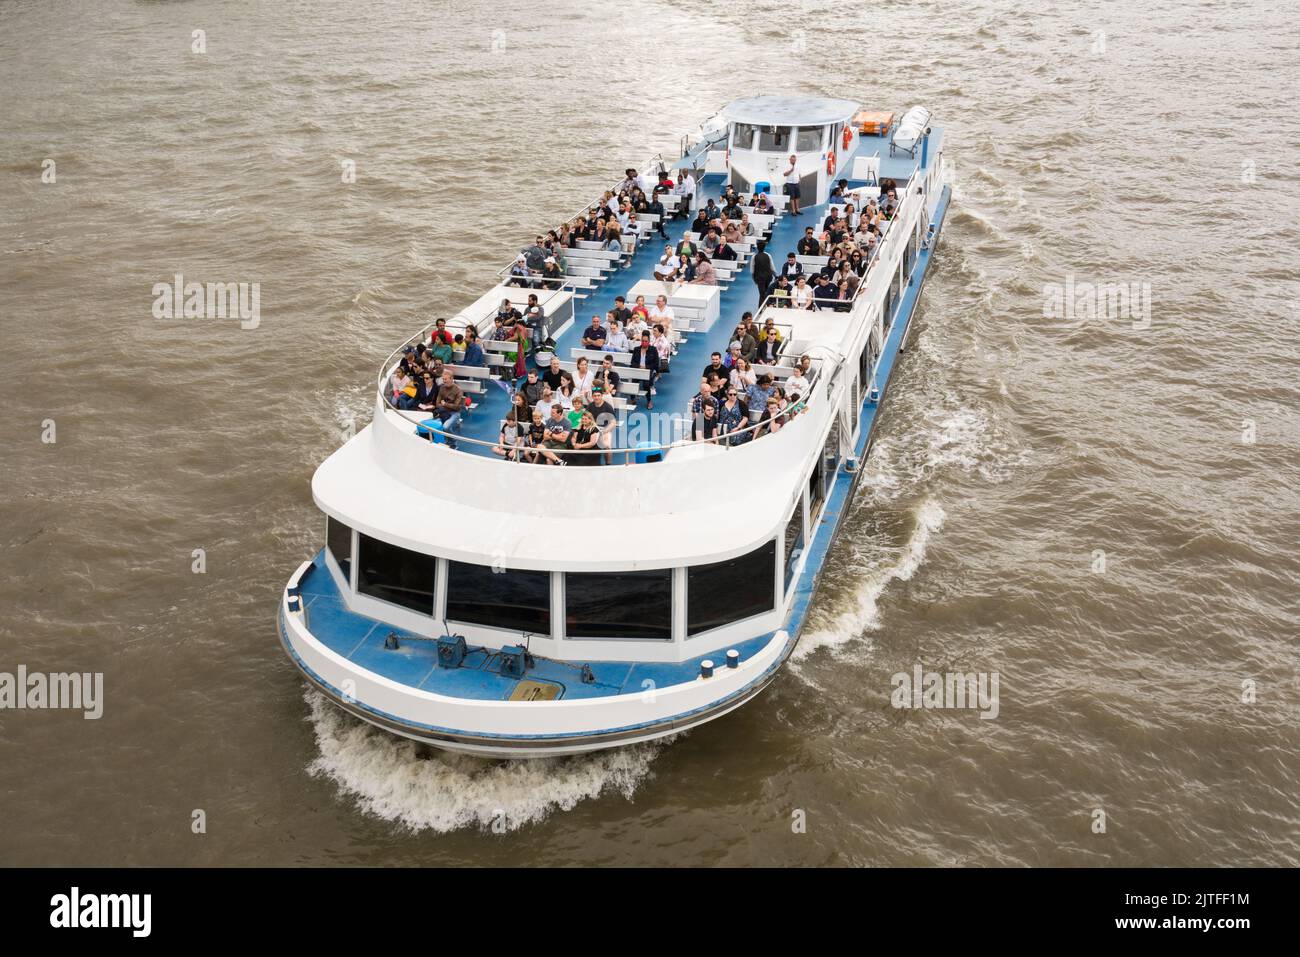 Closeup of tourists aboard a pleasure boat on the River Thames, London, England, UK Stock Photo